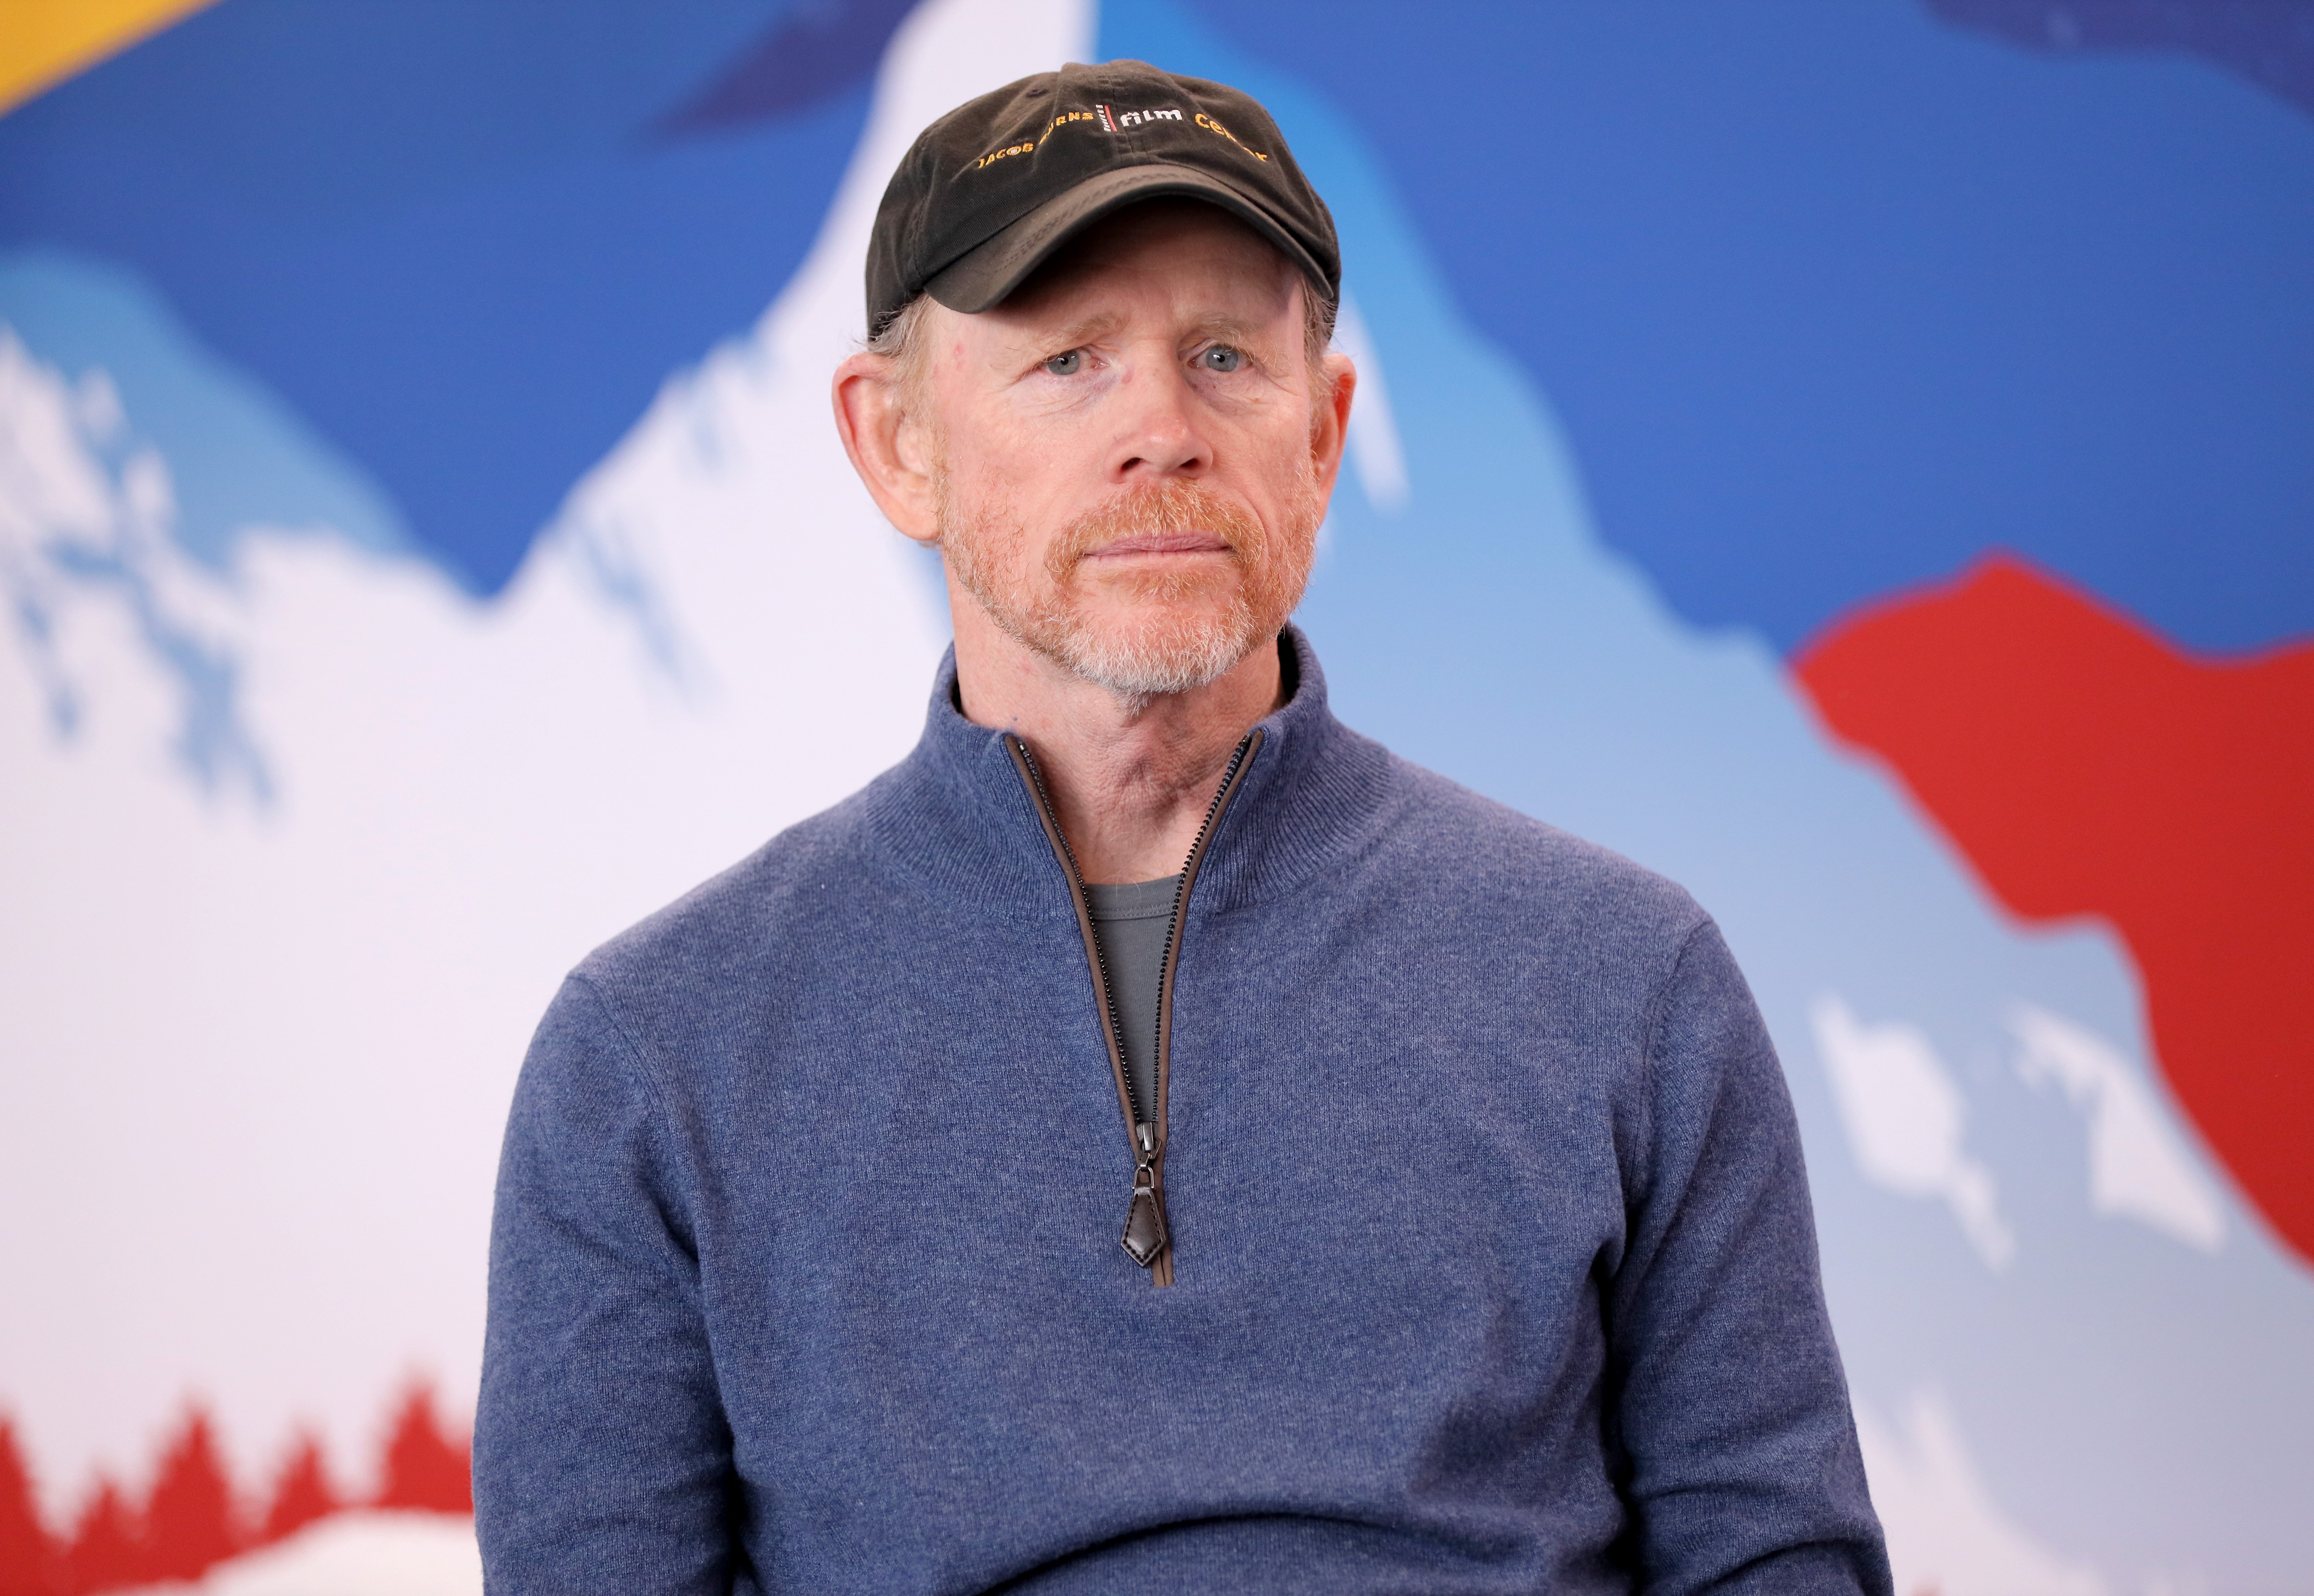 Ron Howard attends the IMDb Studio at Acura Festival Village on January 24, 2020 in Park City, Utah | Photo: Getty Images